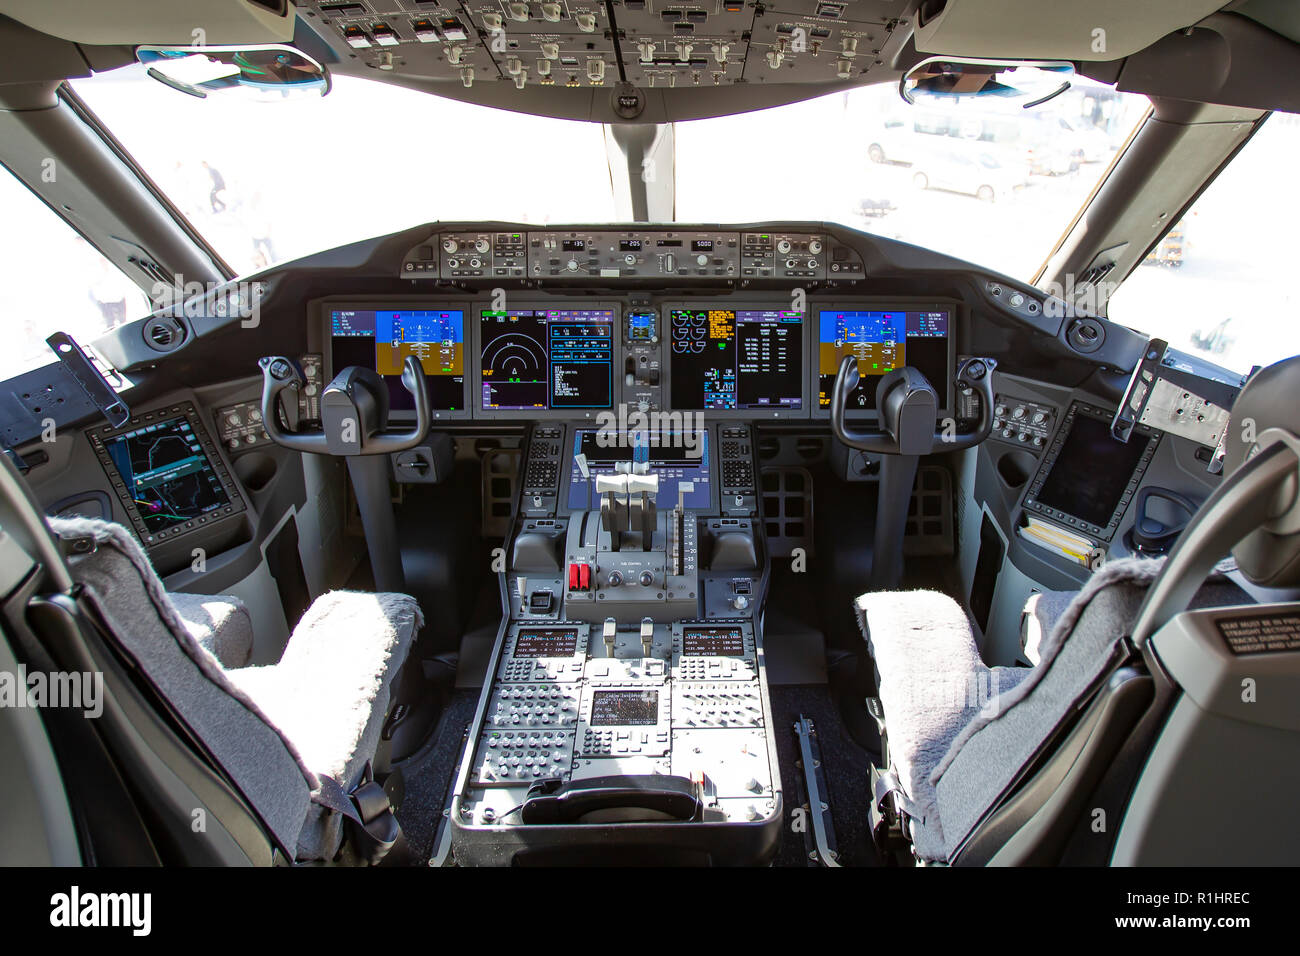 Interior of the cockpit of an El Al Boeing 787-9 Dreamliner Photographed at Ben-Gurion Airport, Israel Stock Photo